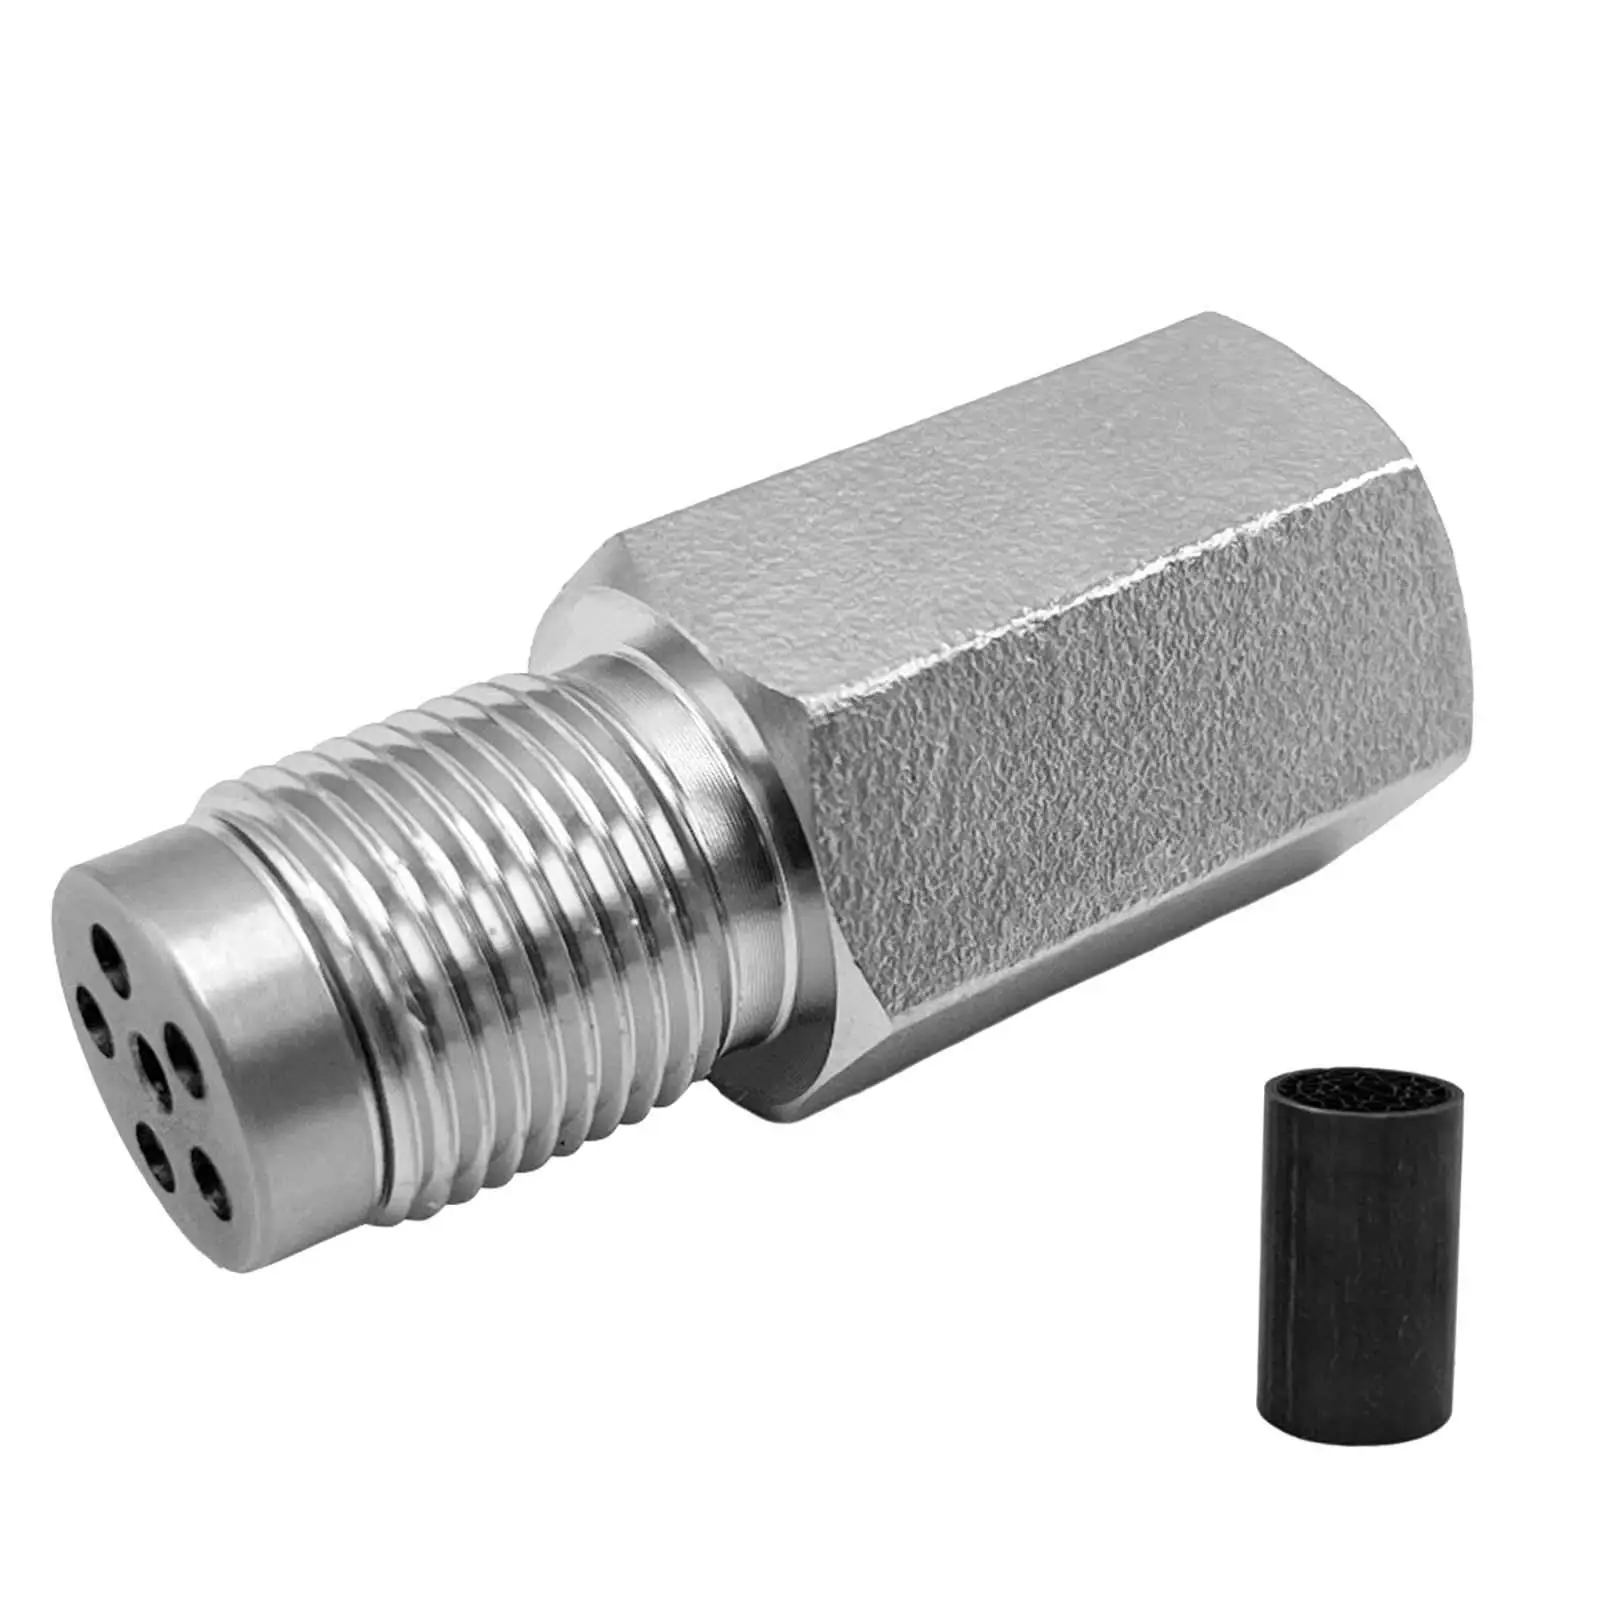 Oxygen Sensor Extender Adapter Works with M18 x 1.5mm Spark Plug Threads for Exhaust Systems Stable Performance